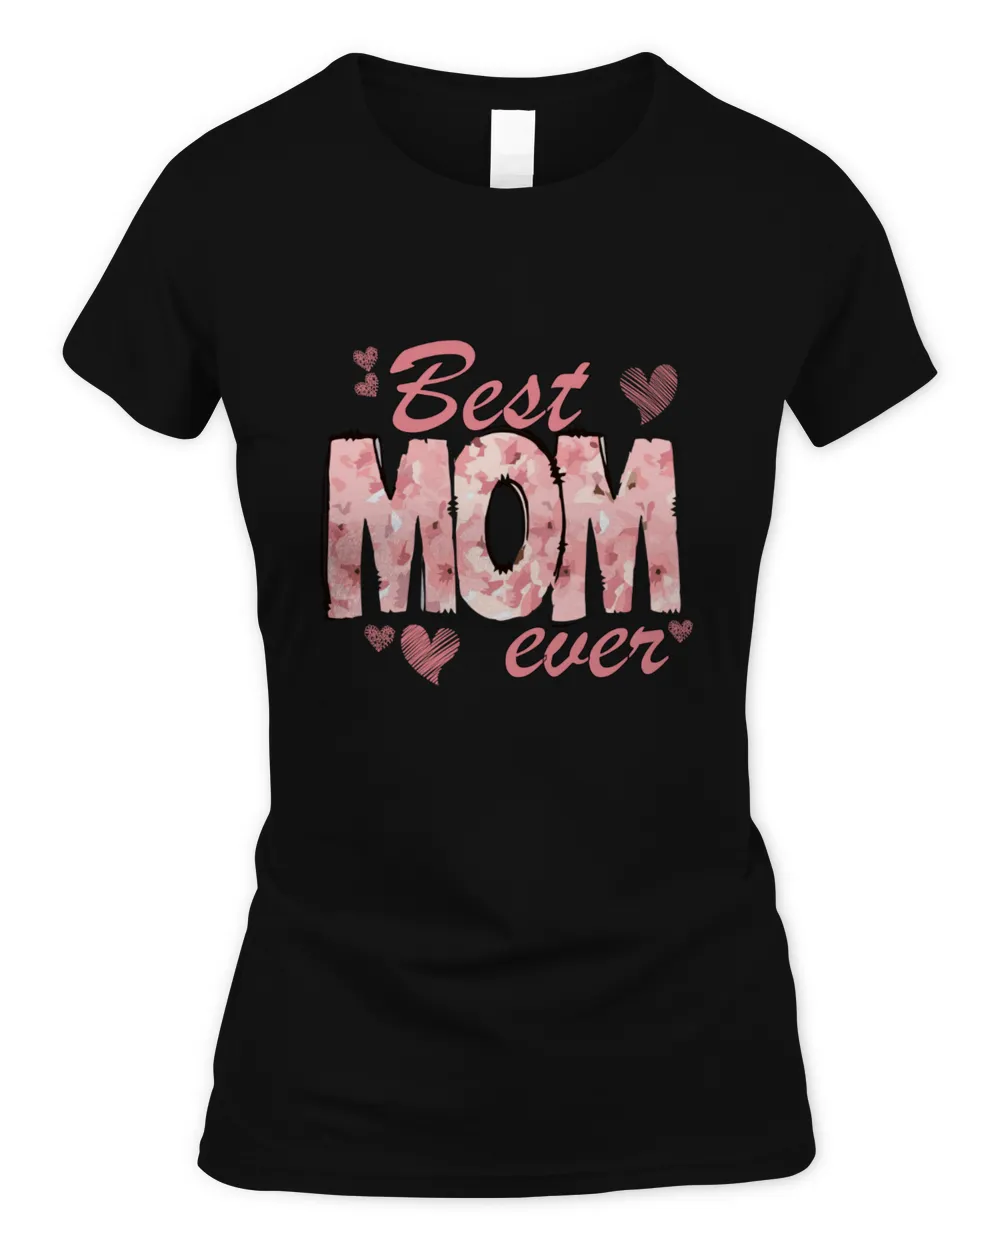 Best mom ever, gift for mother day